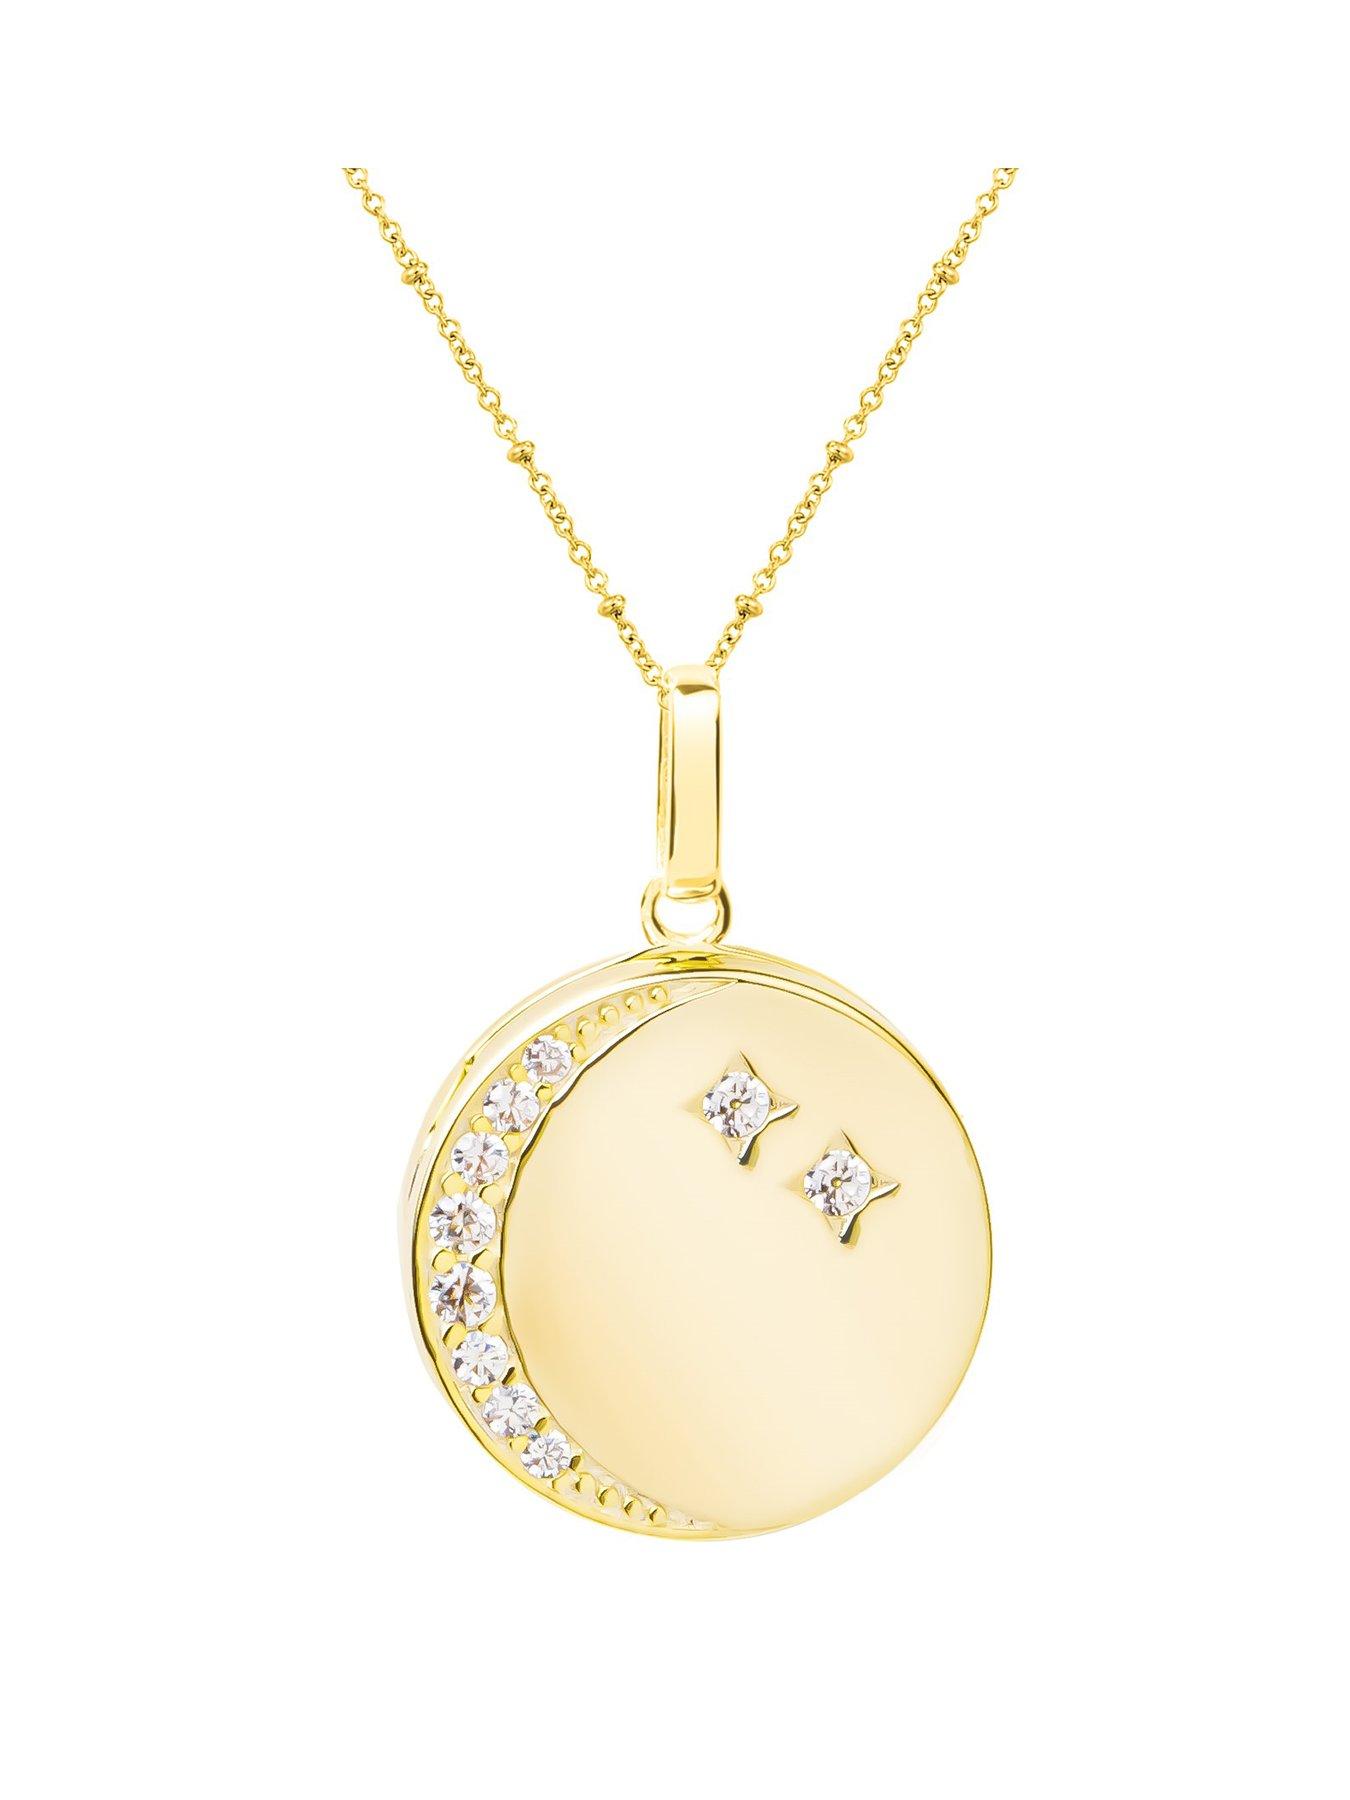 The Love Silver Collection 18ct Gold Plated Sterling Silver Round Star  Constellation and Moon CZ Locket with Adjustable Chain Necklace